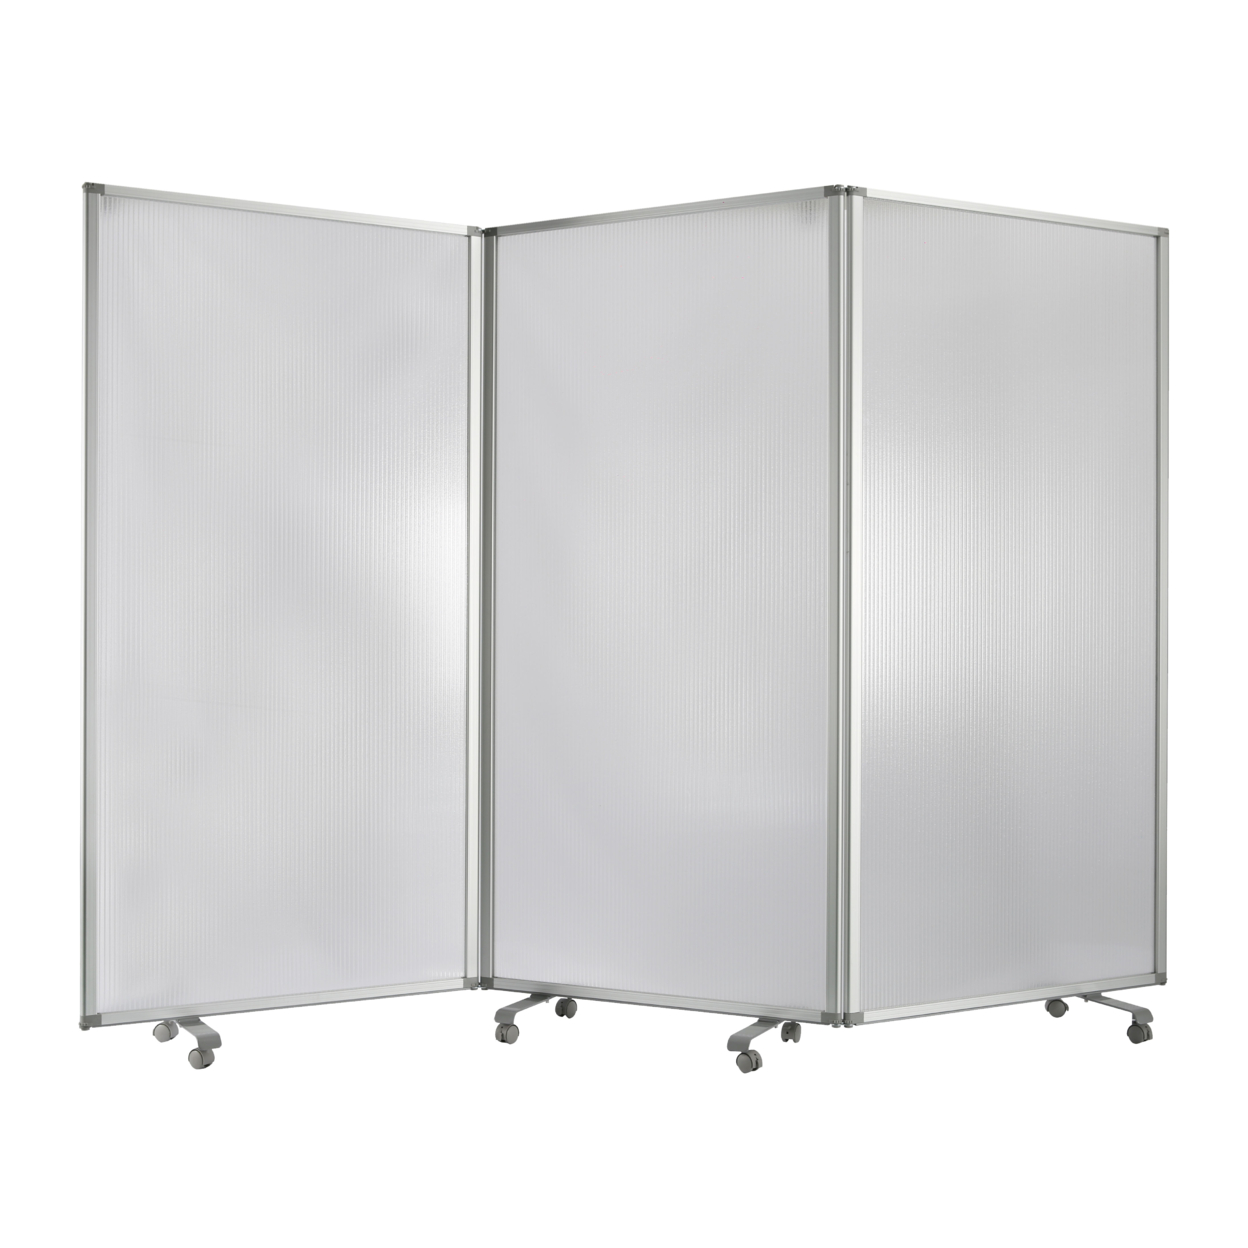 Accordion Style Plastic Inserts 3 Panel Room Divider With Casters, Gray- Saltoro Sherpi